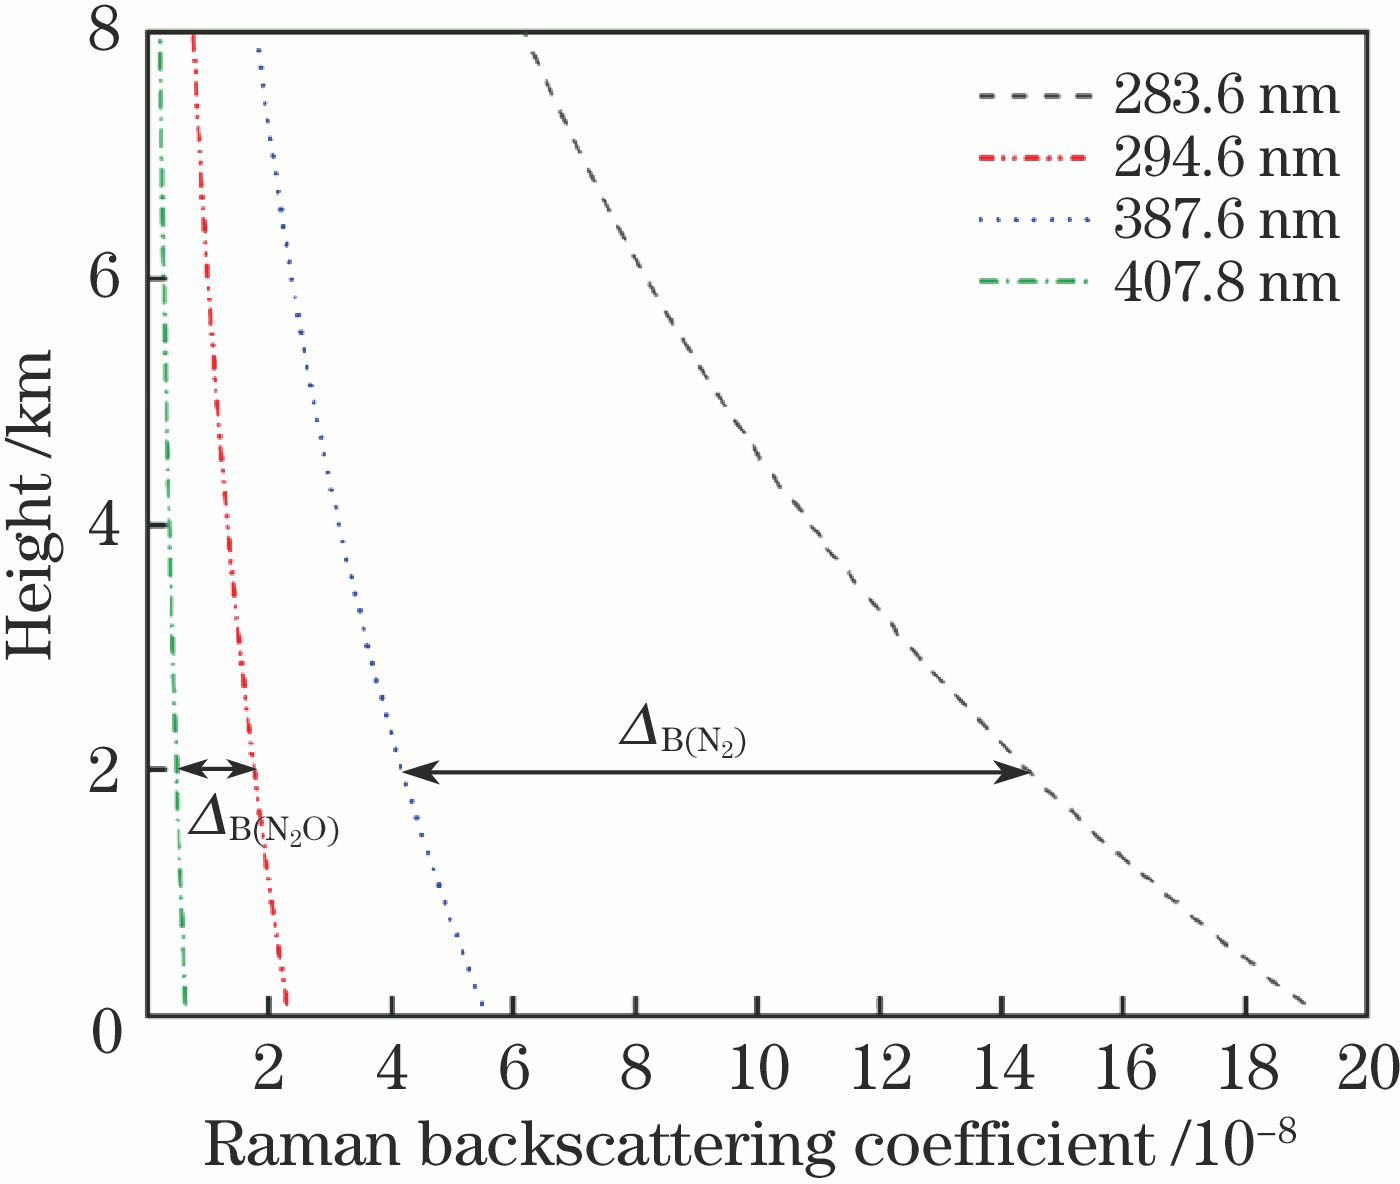 Raman backscattering coefficients of N2 and H2O with excitation wavelengths of 354.7 nm and 266.0 nm